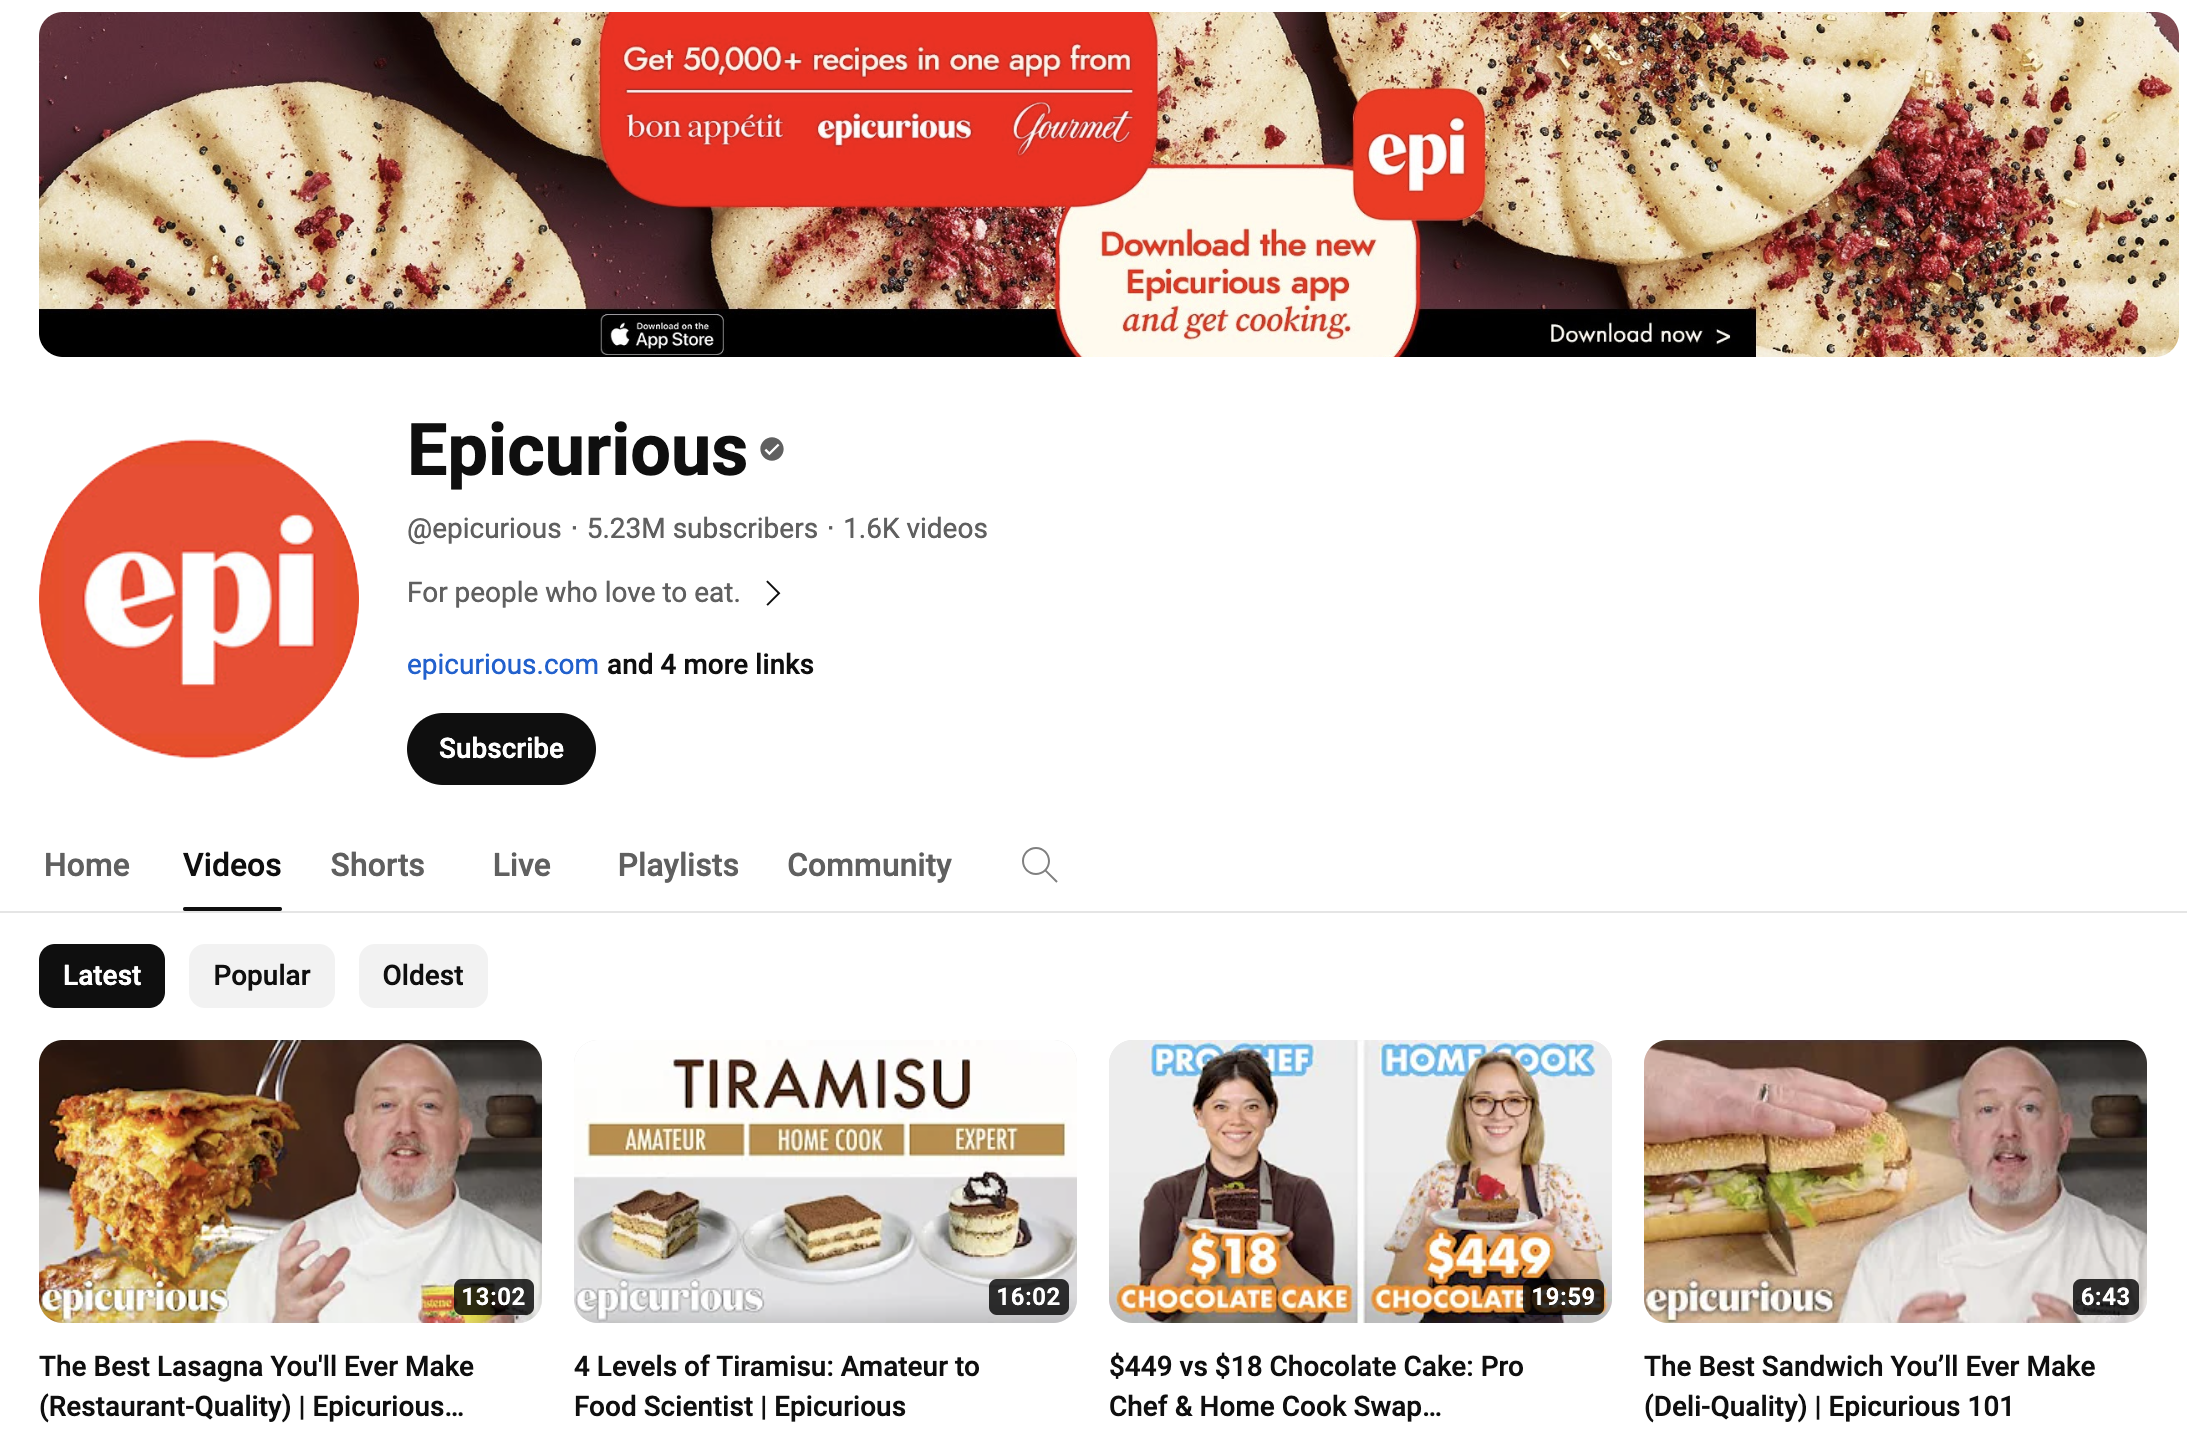 Screenshot of video page for YouTube cooking channel Epicurious